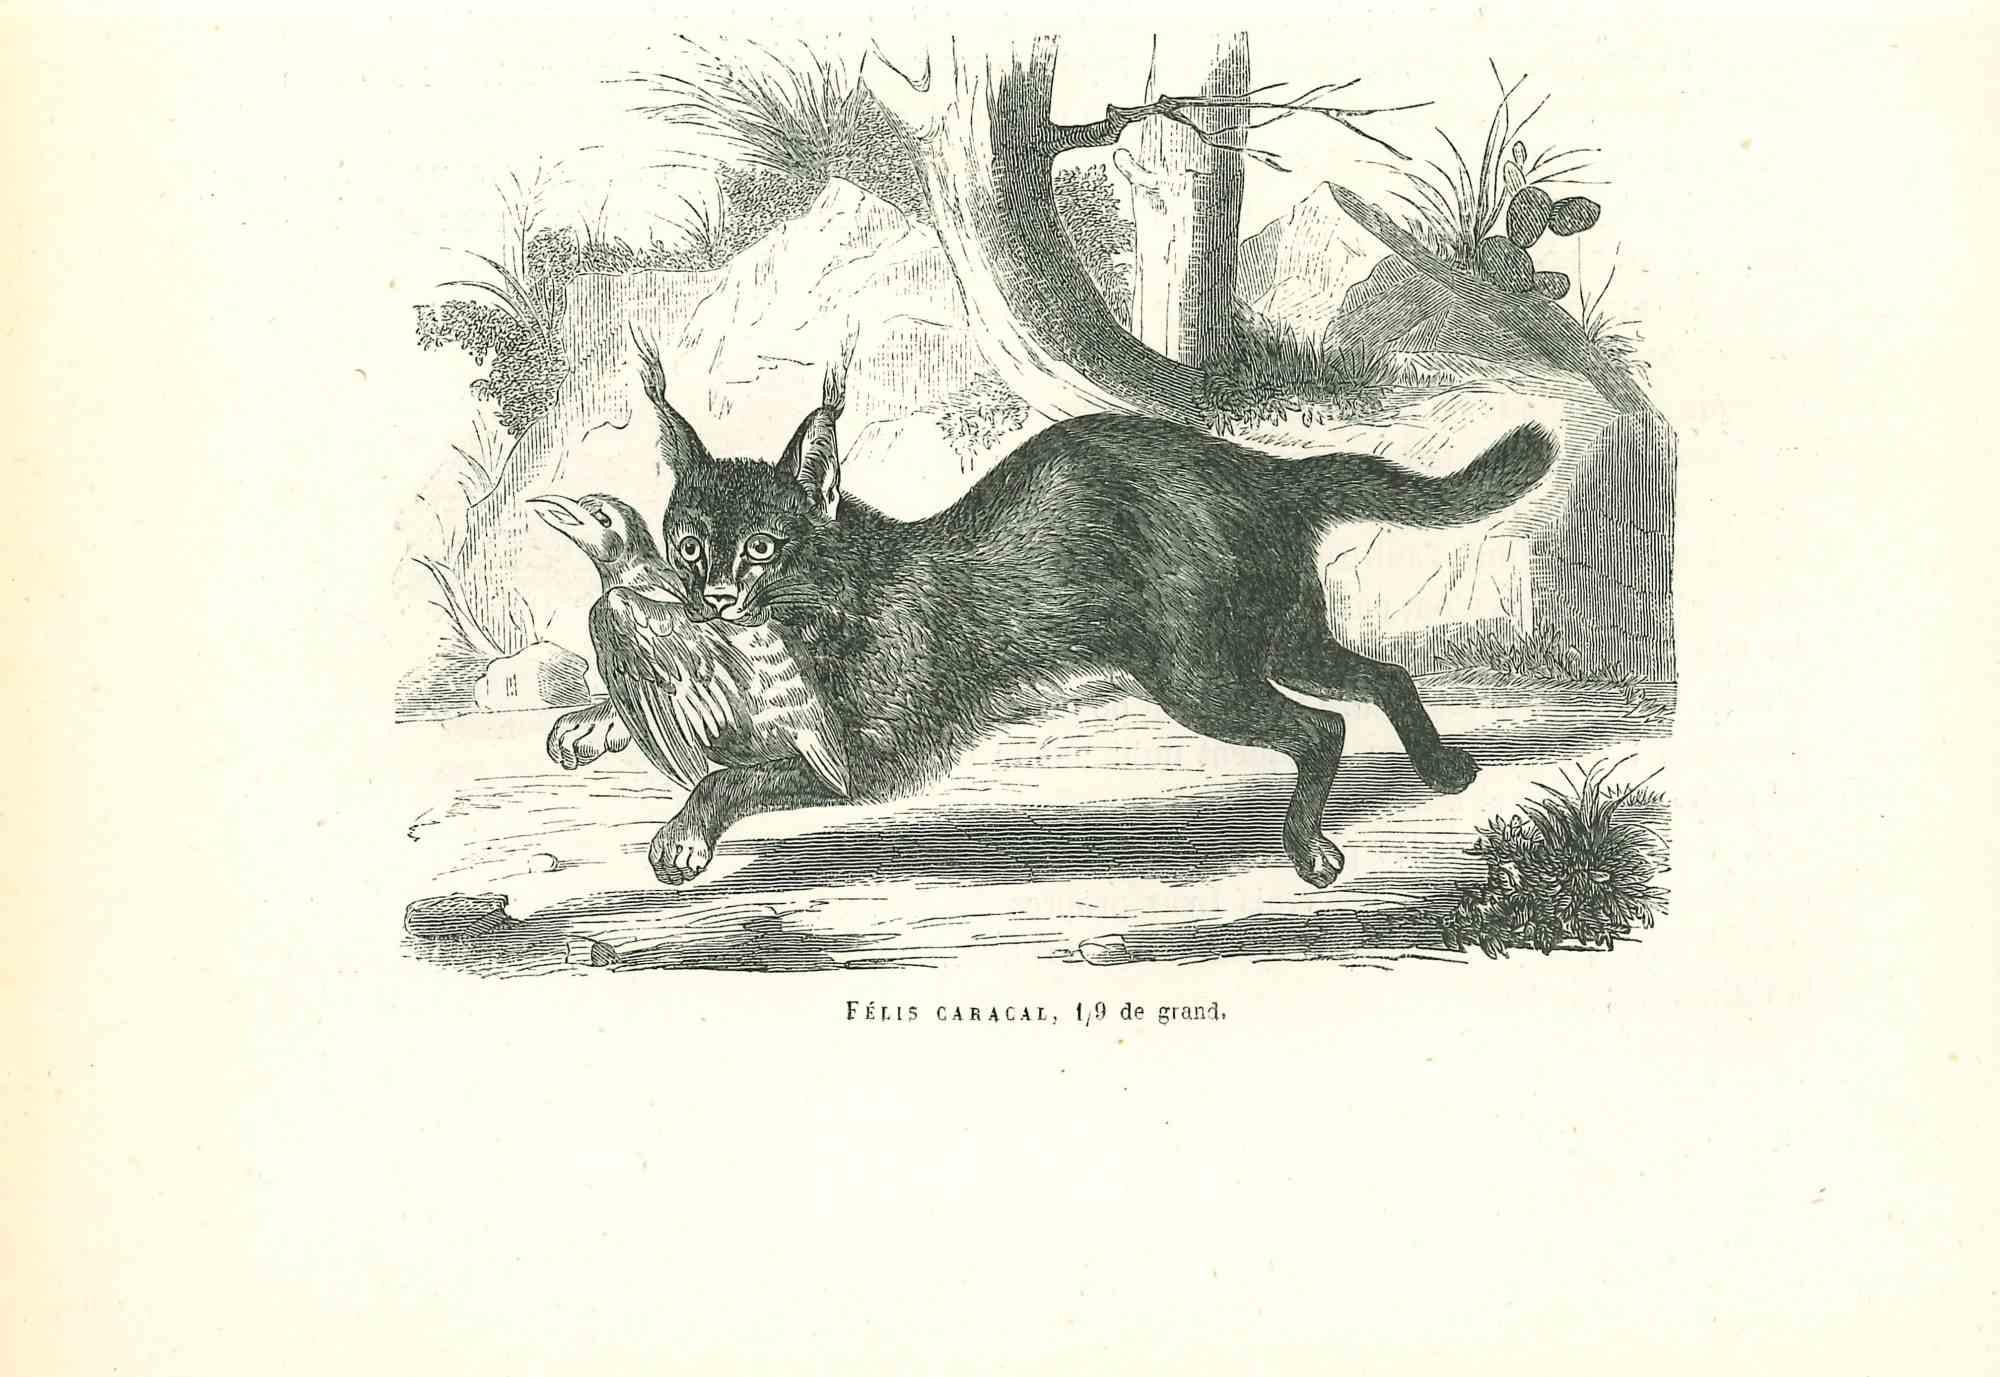 The Hunting Cat is an original lithograph on ivory-colored paper, realized by Paul Gervais (1816-1879). The artwork is from The Series of "Les Trois Règnes de la Nature", and was published in 1854.

Good conditions.

Titled on the lower. With the